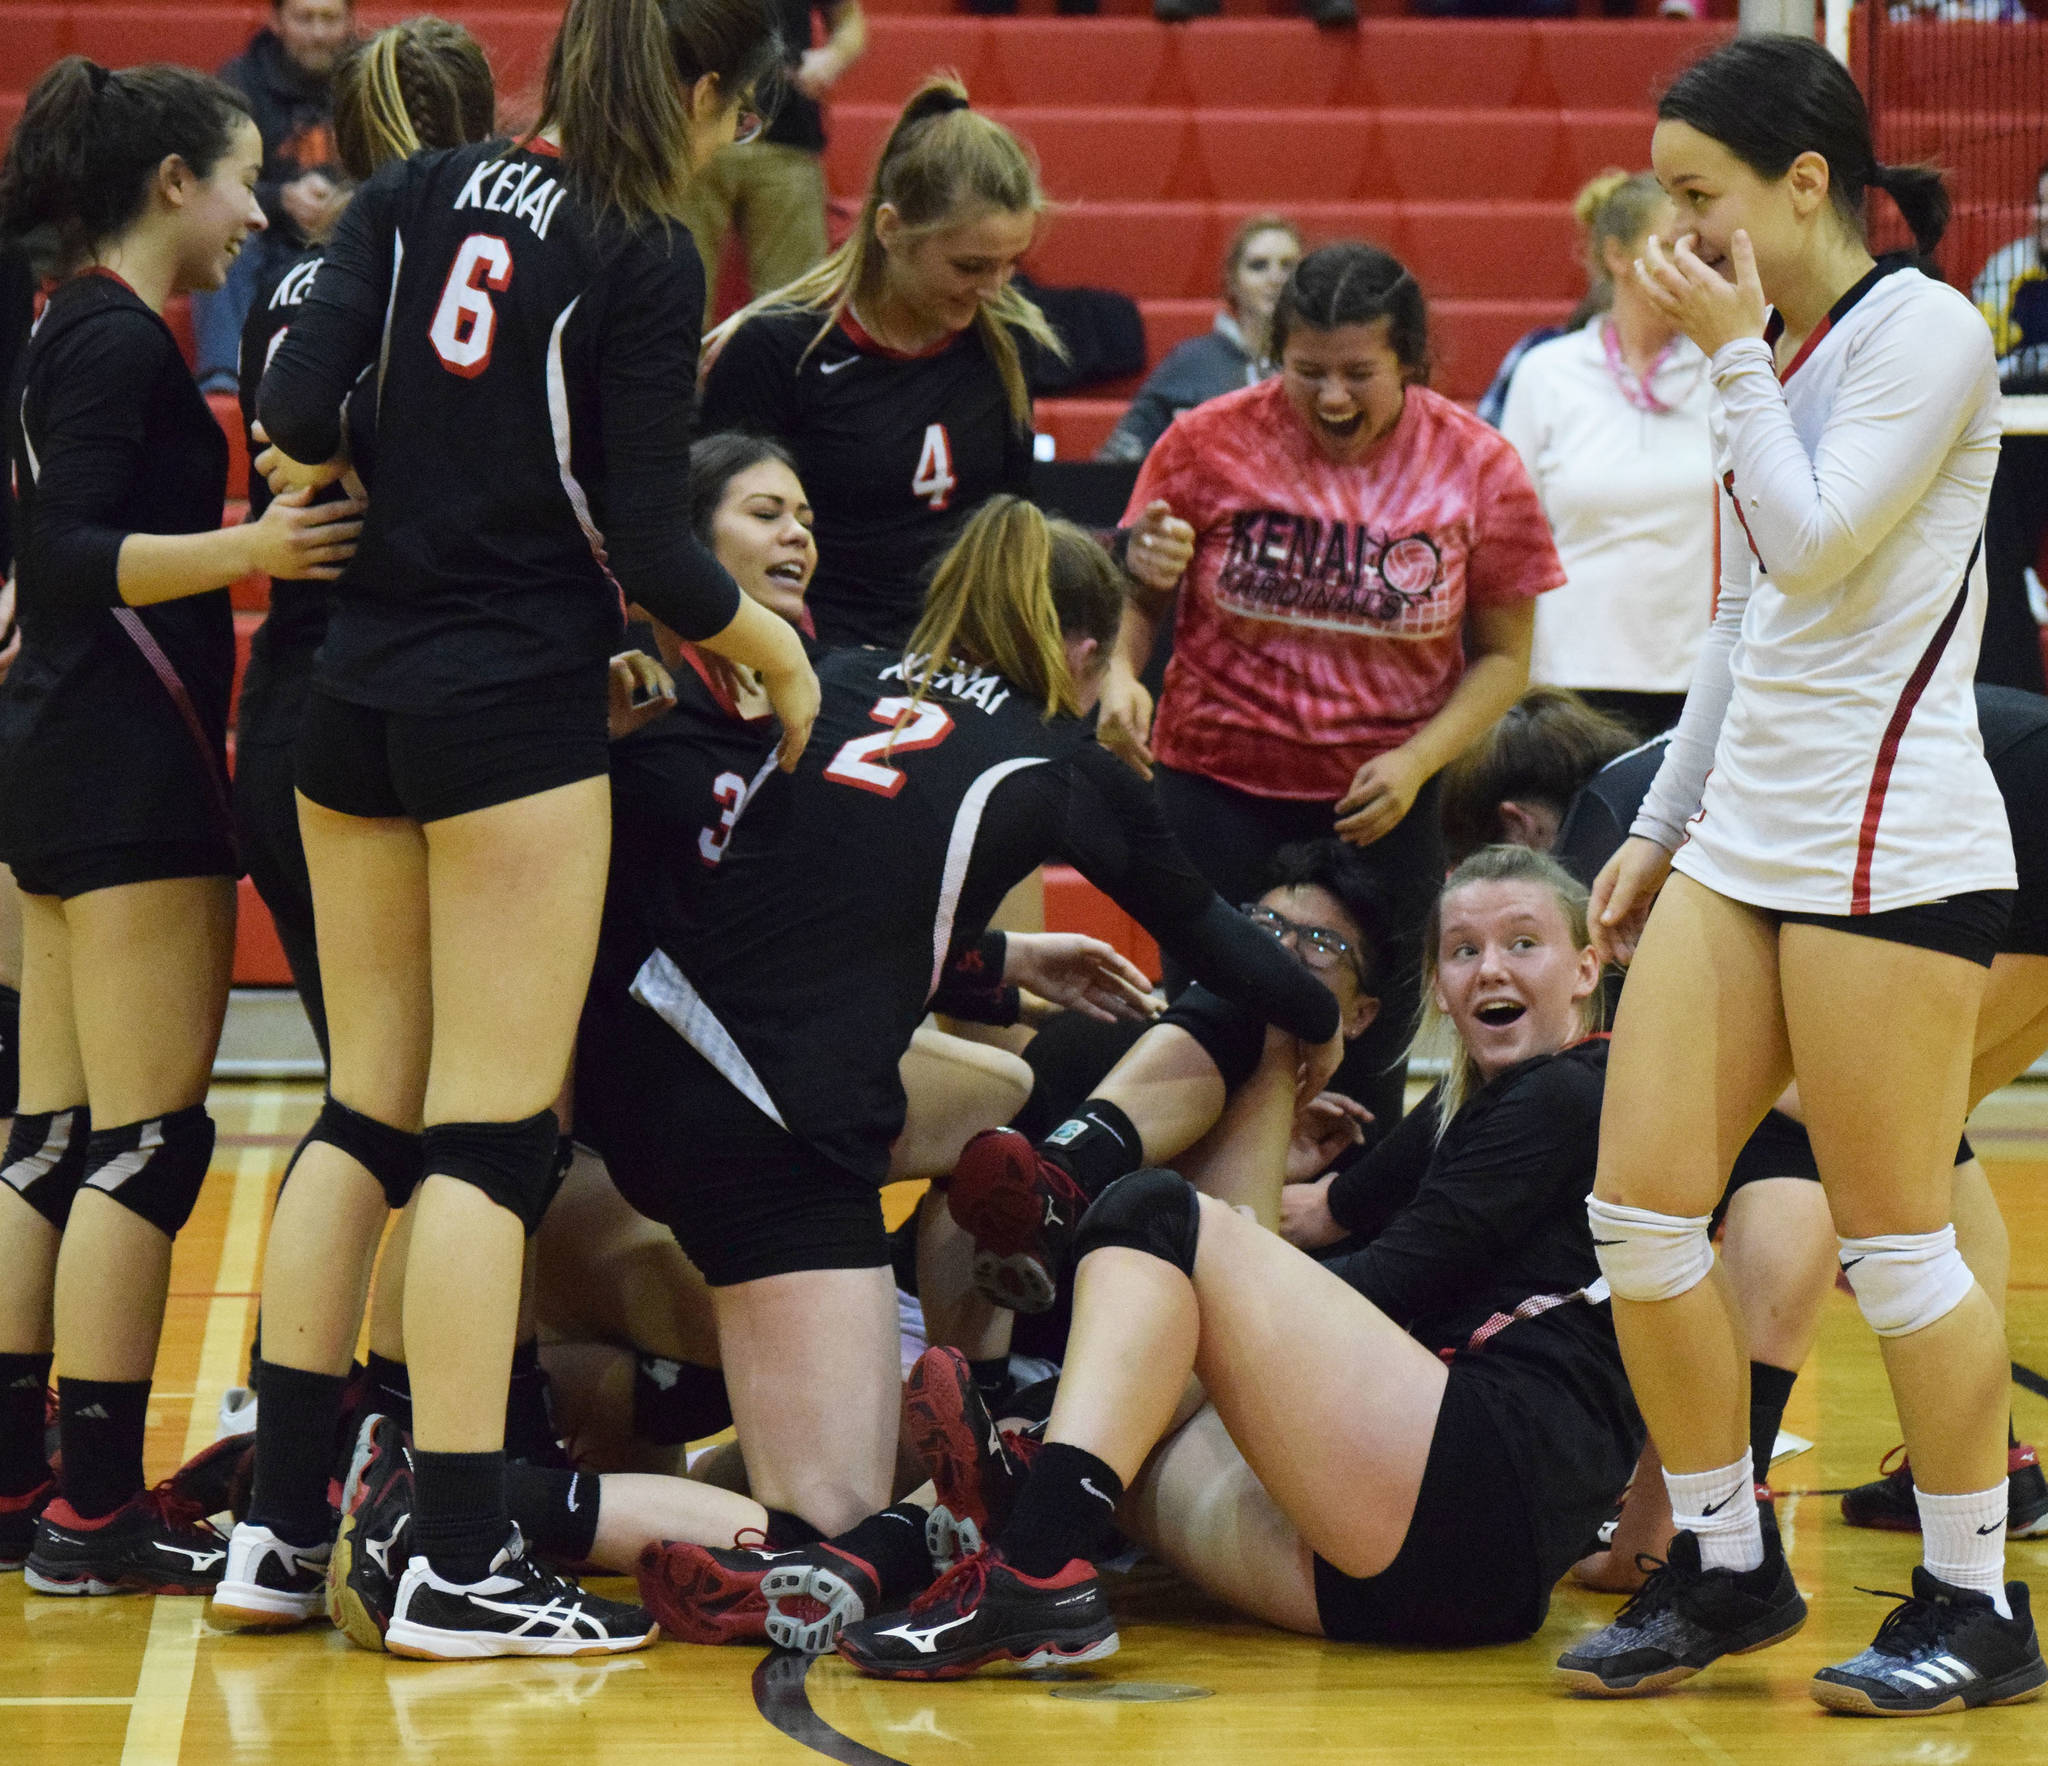 The Kenai Central volleyball team celebrates in a dogpile on the floor Thursday, Oct. 31, 2019, after defeating Soldotna at Kenai Central High School in Kenai, Alaska. (Photo by Joey Klecka/Peninsula Clarion)